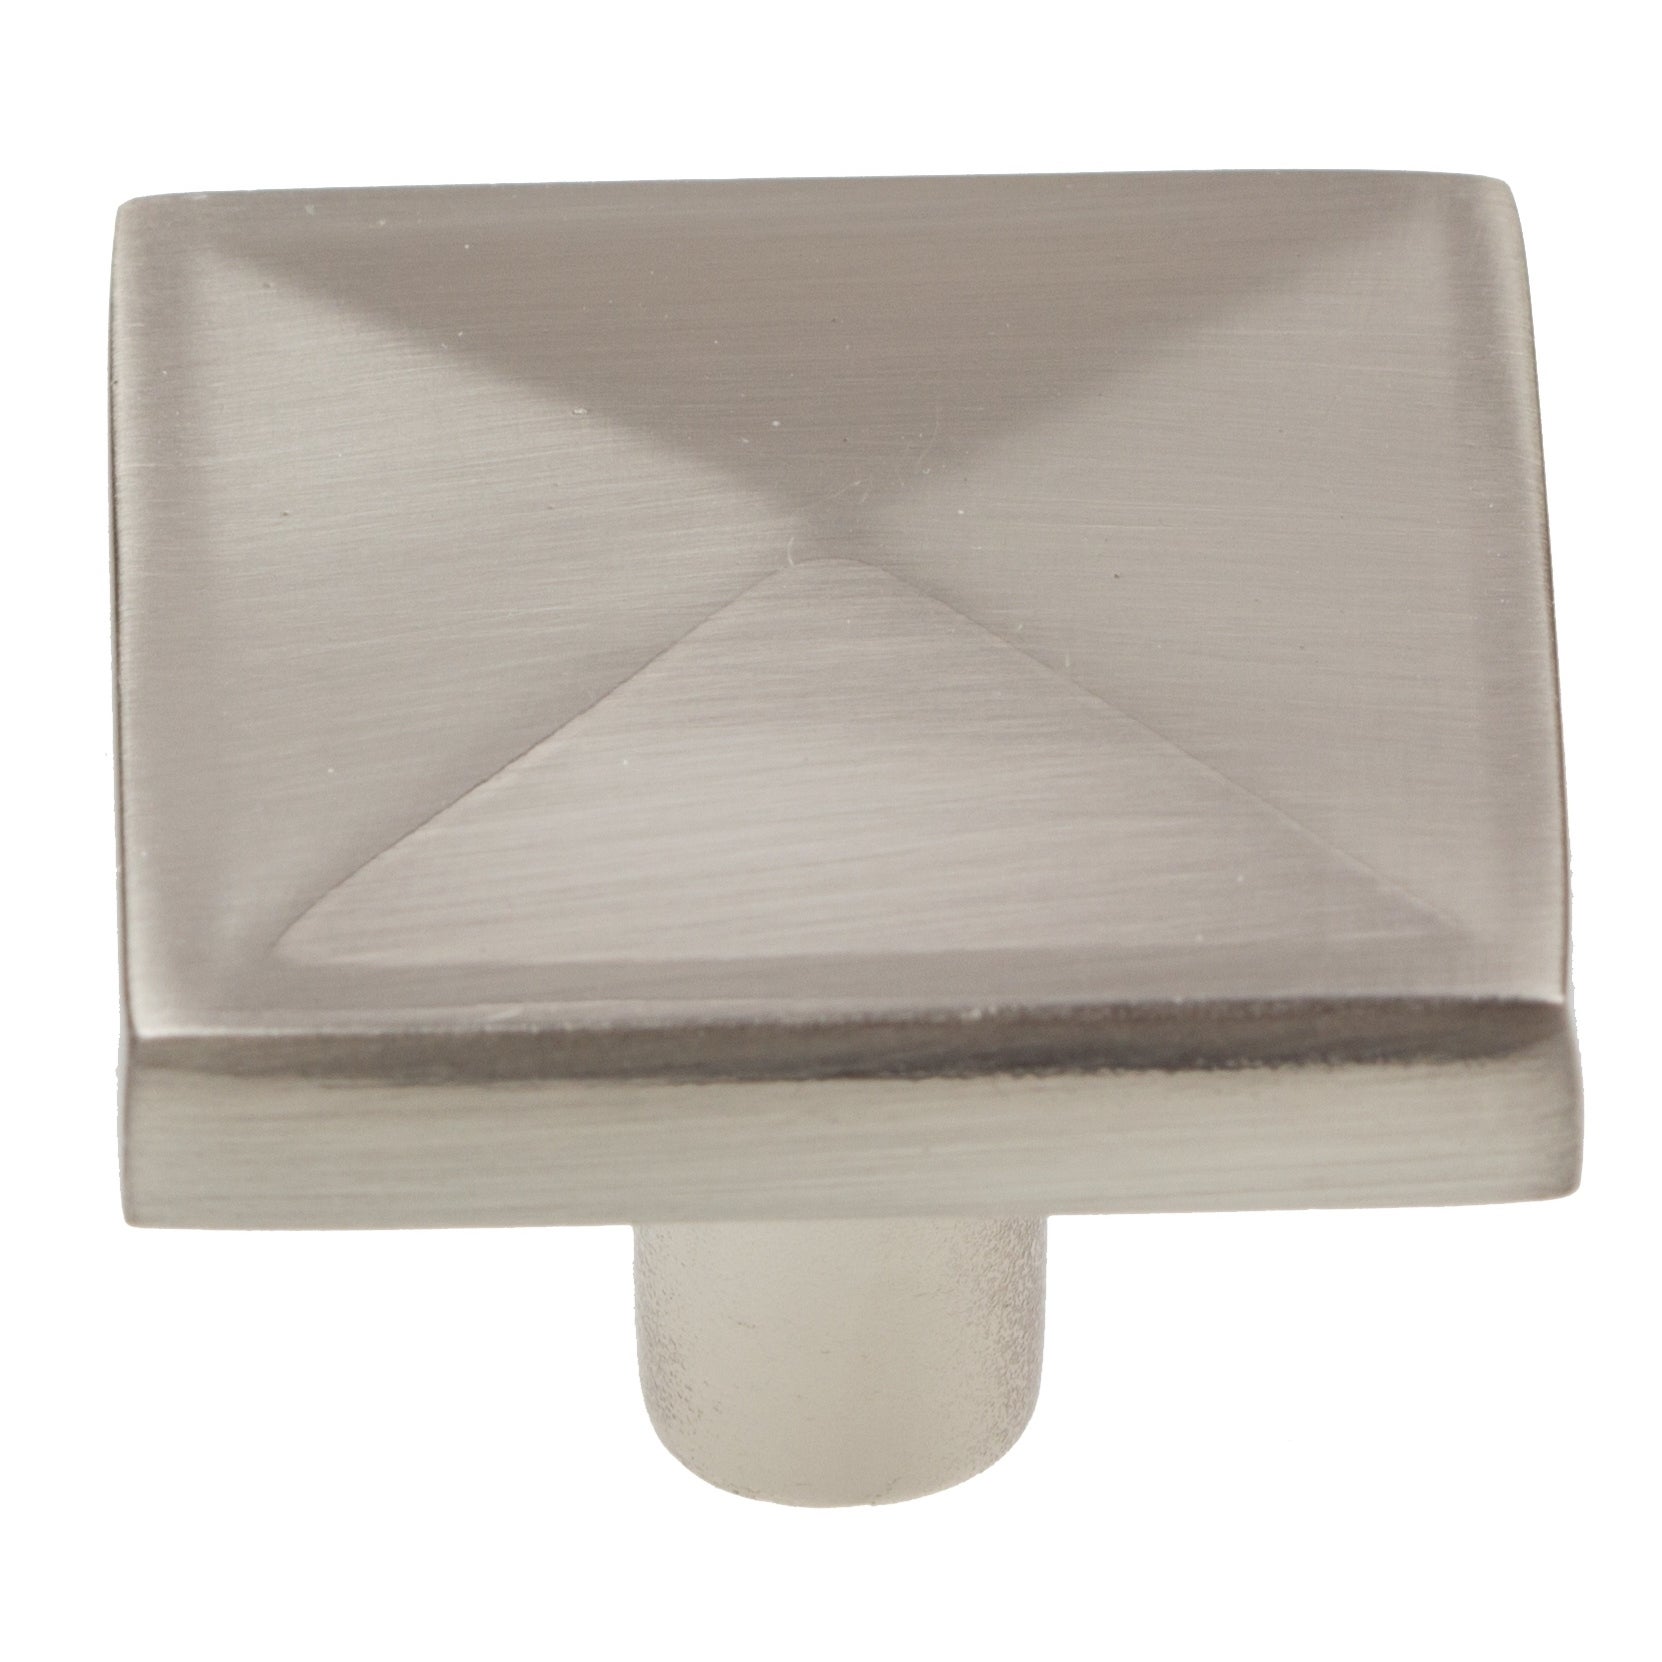 GlideRite 1-1/4 in. Classic Square Pyramid Cabinet Knobs, Satin Nickel, Pack of 25 - image 2 of 5